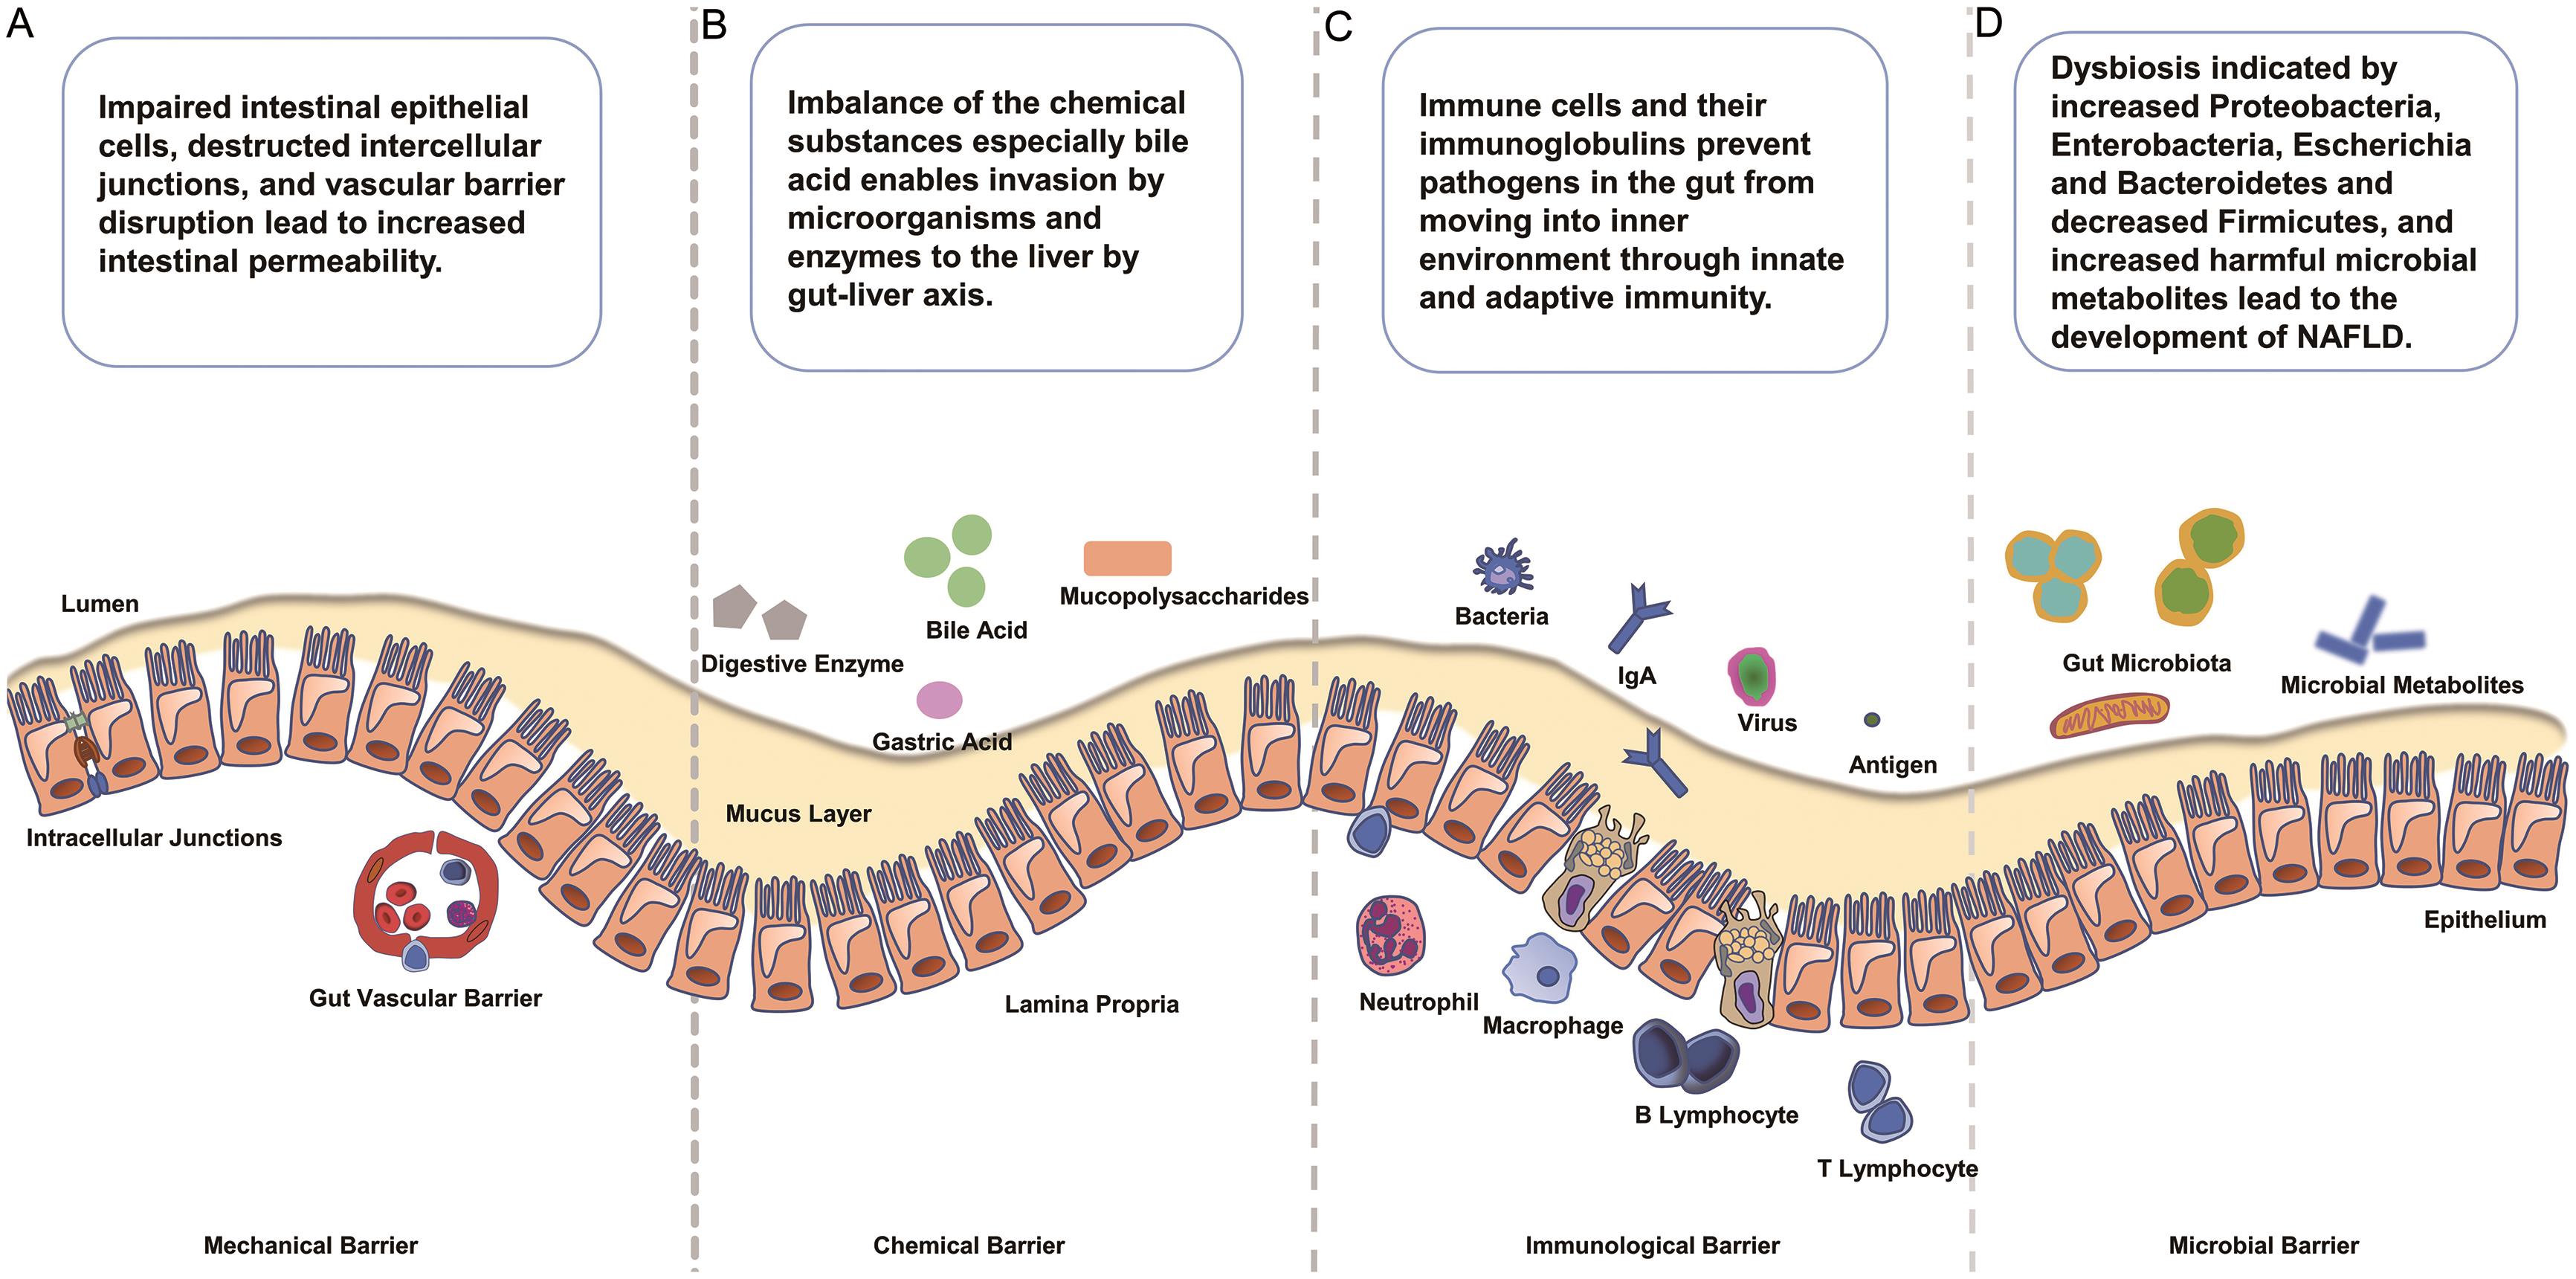 Intestinal barrier components and the pathophysiological changes in NAFLD.